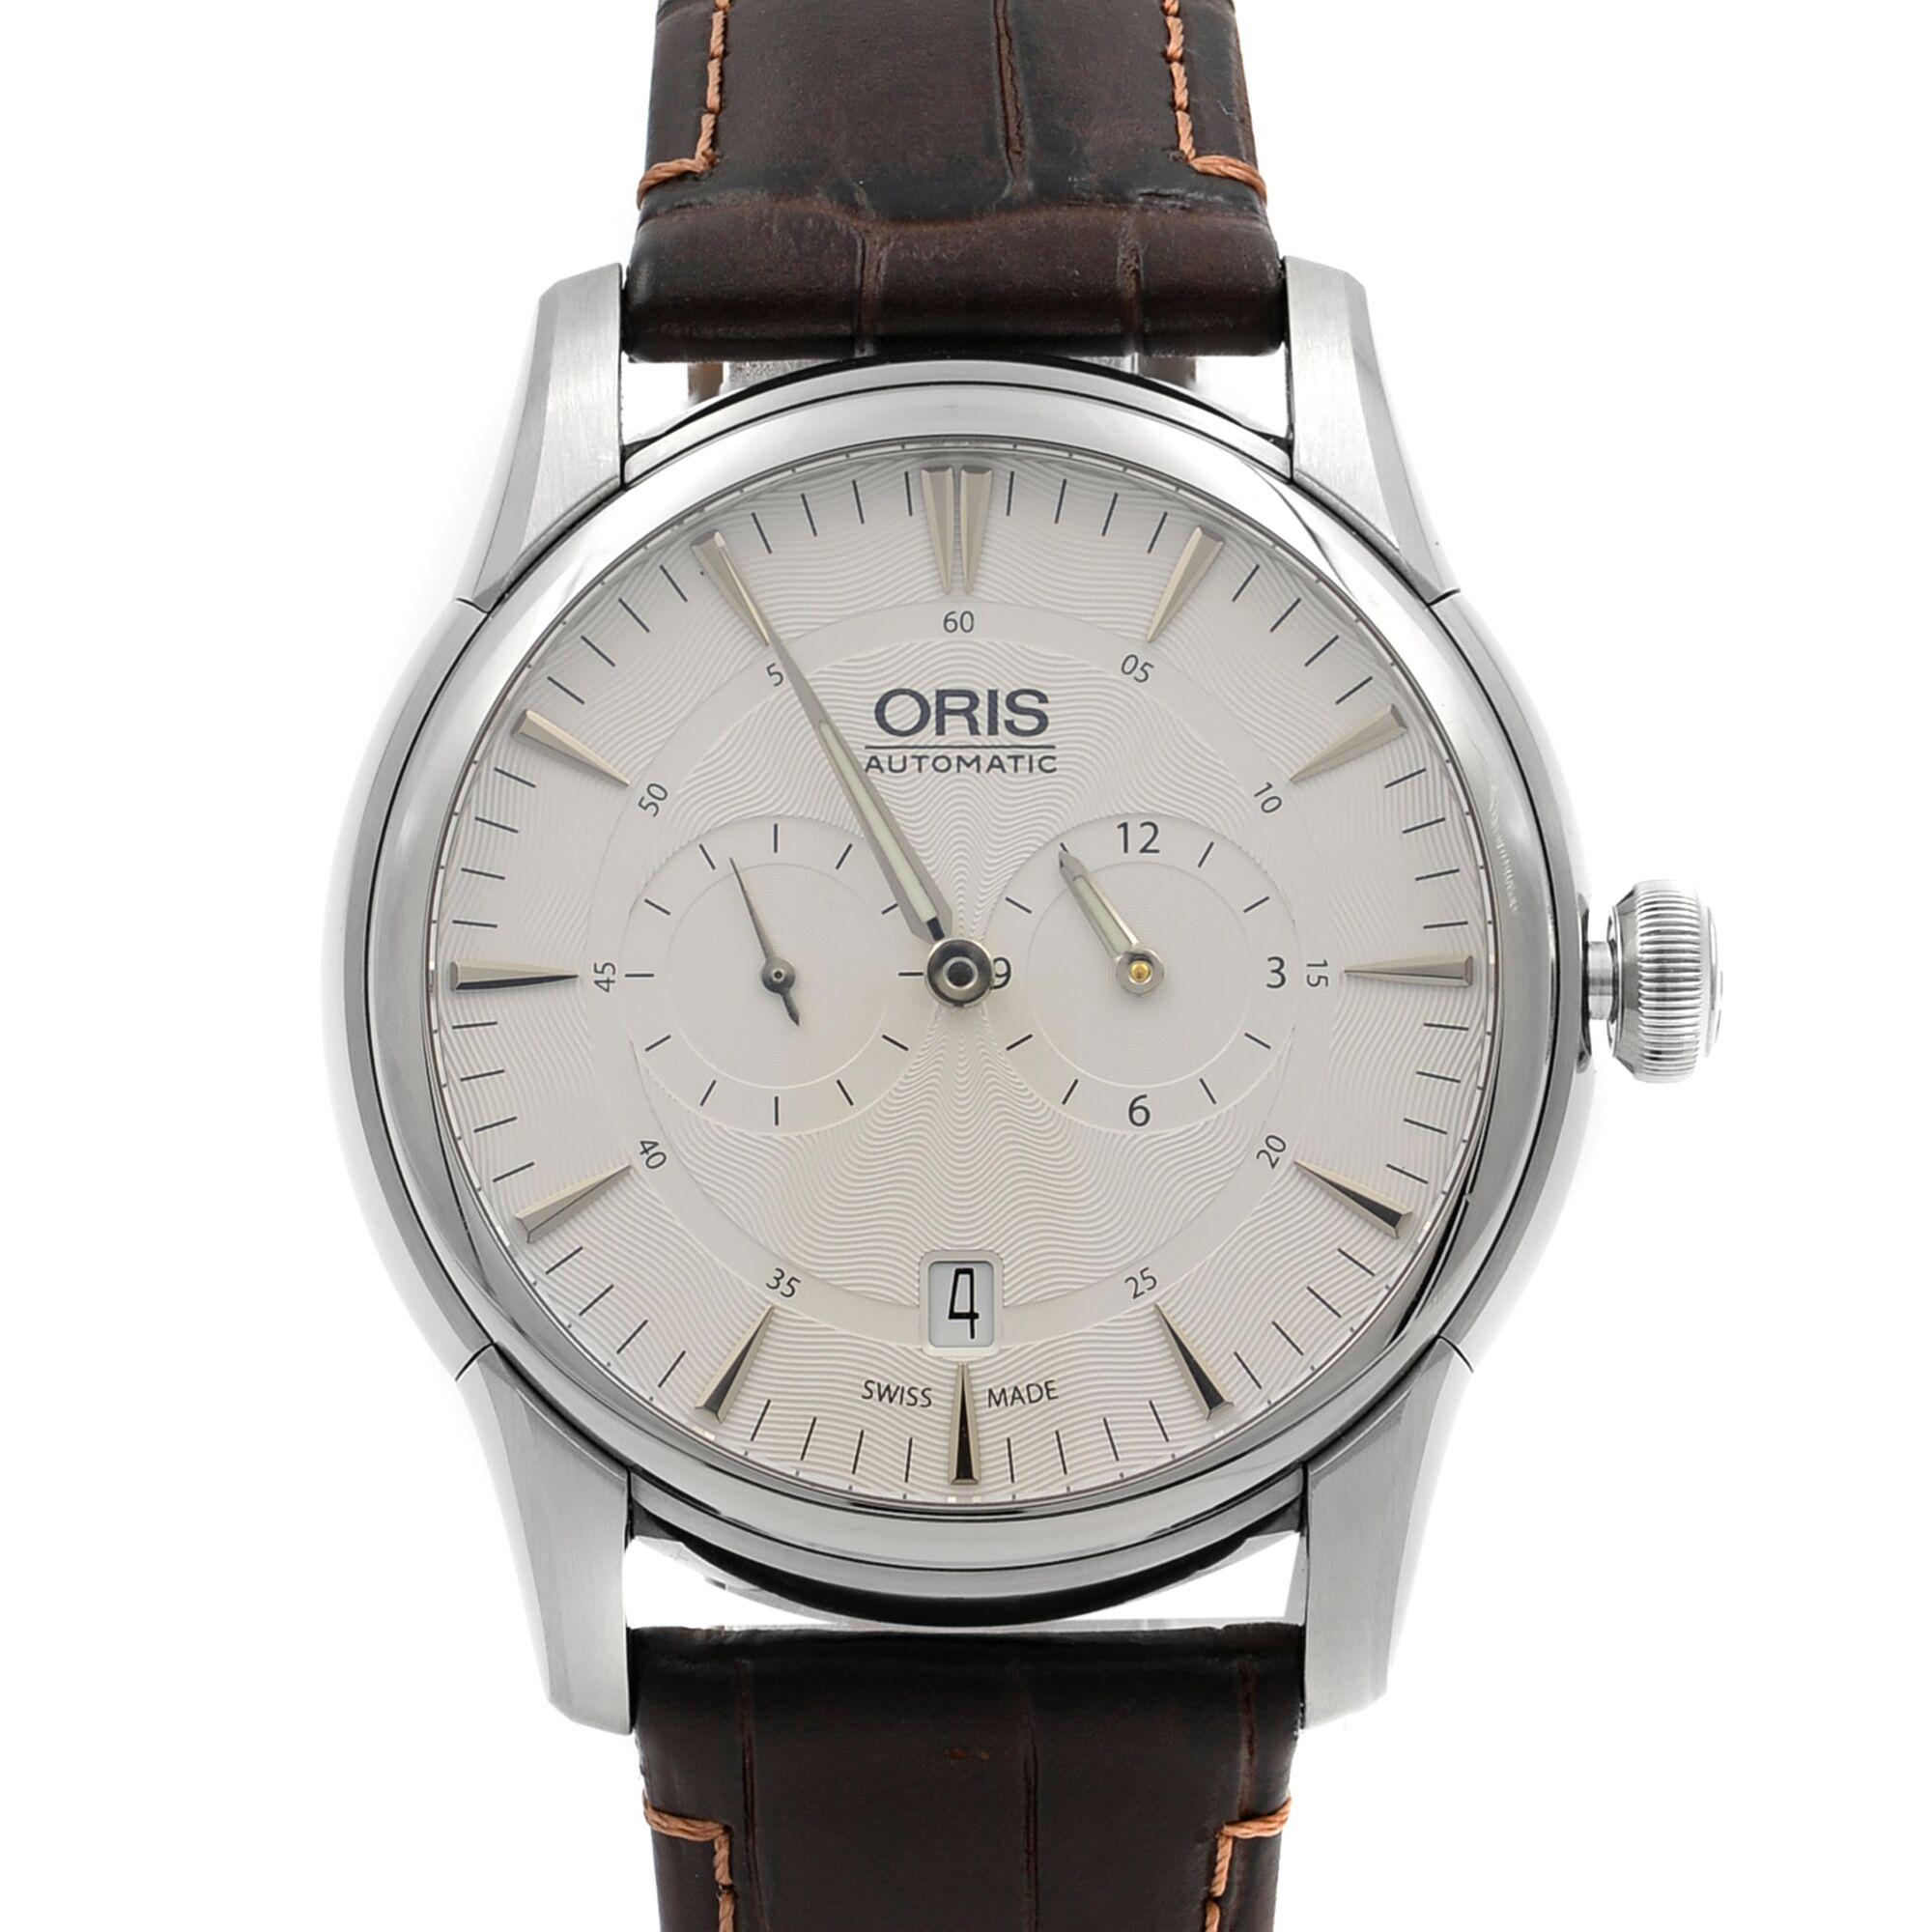 This display model Oris Artelier Regulateur  0169075814051 is a beautiful men's timepiece that is powered by mechanical (automatic) movement which is cased in a stainless steel case. It has a round shape face, date, small seconds subdial dial and